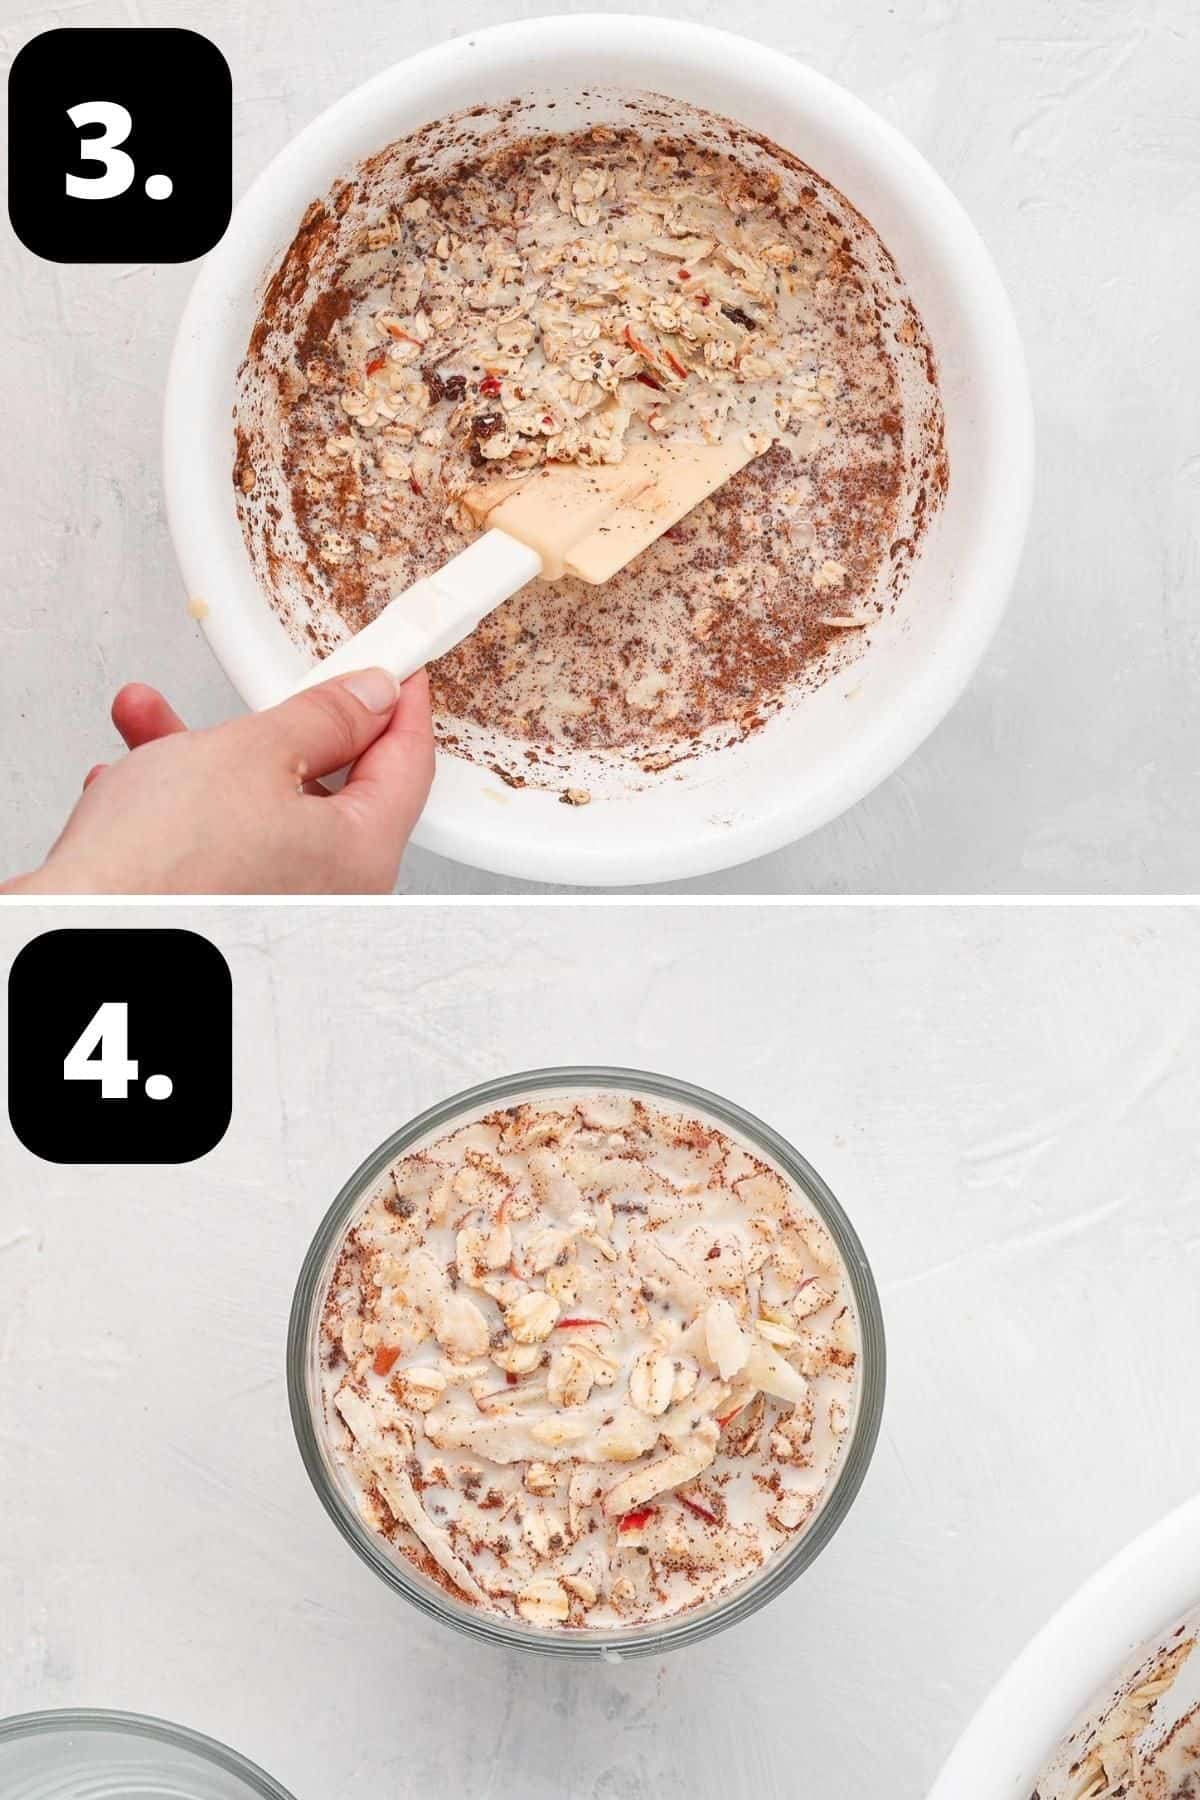 Steps 3-4 of preparing this recipe - mixing the ingredients in the bowl and putting them into a jar ready to refrigerate.